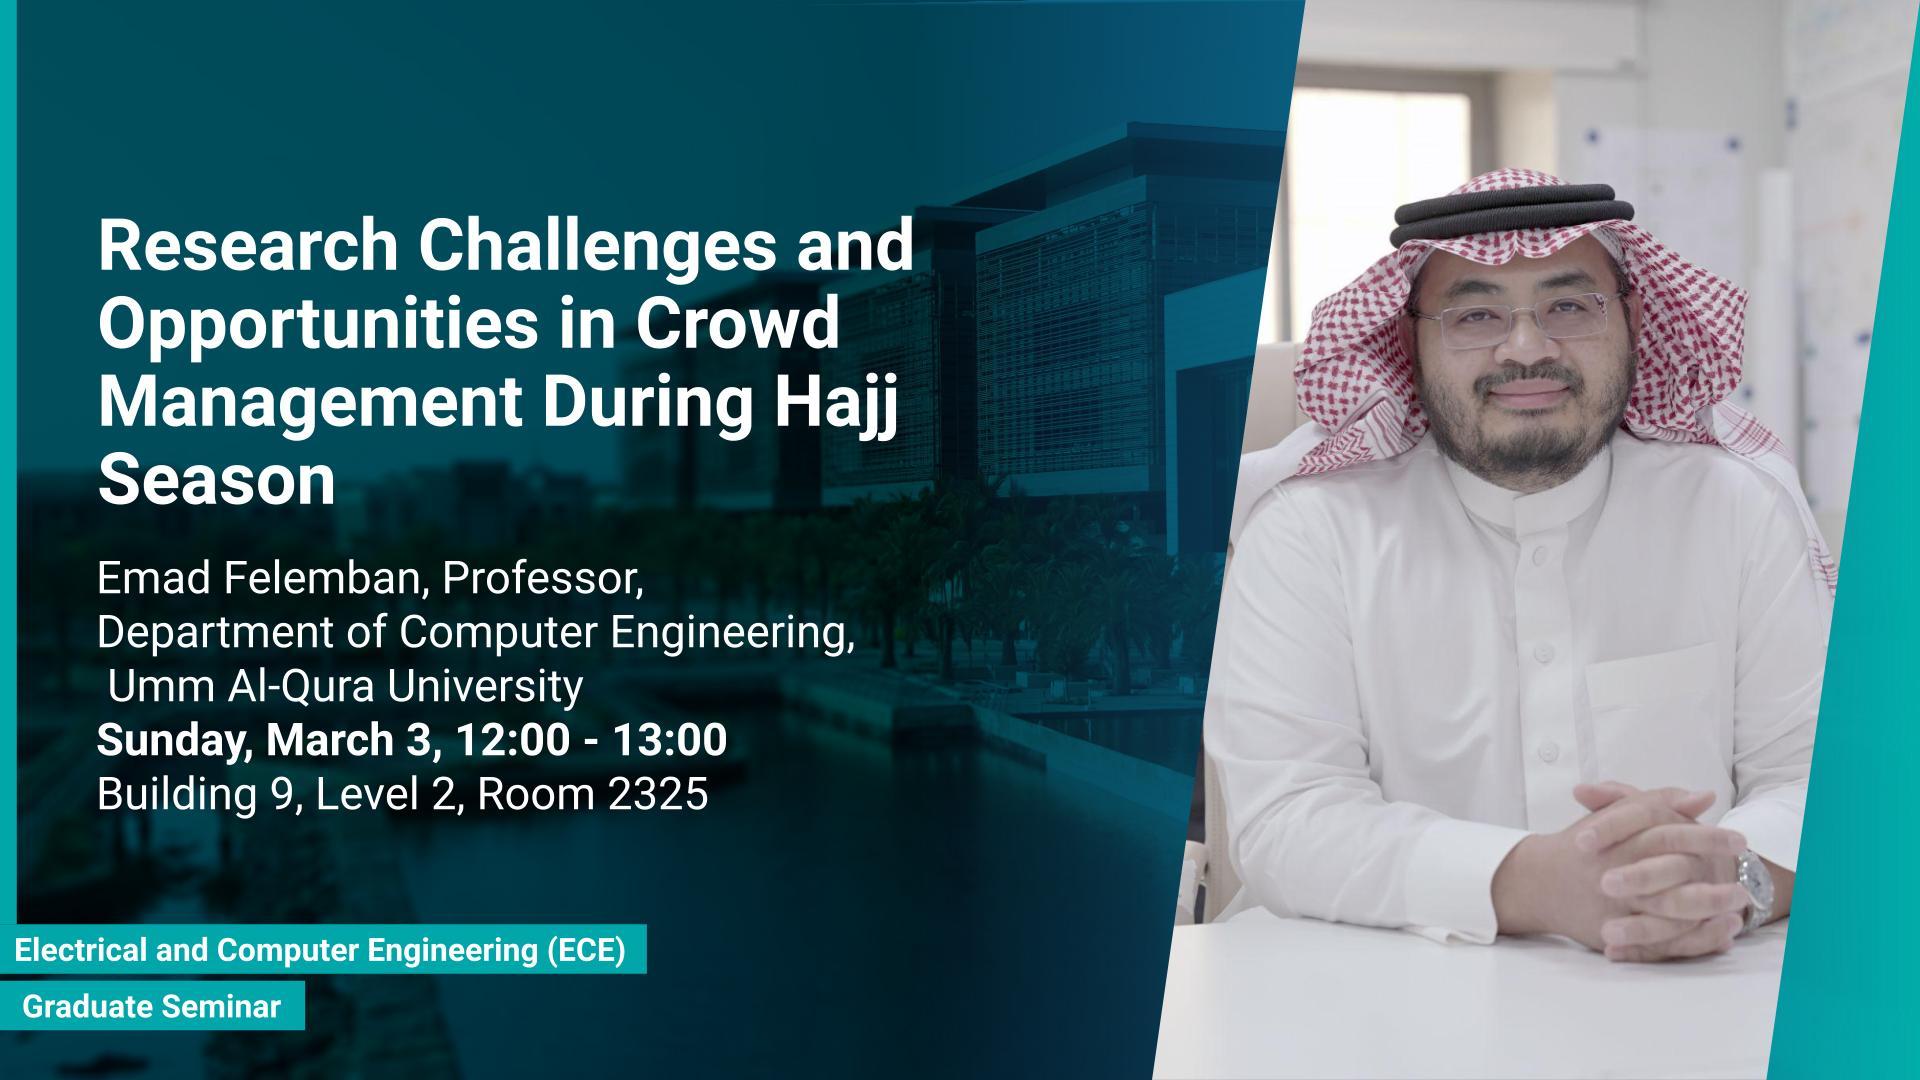 KAUST-CEMSE-ECE-Graduate-Seminar-Emad-Felemban-Research-Challenges-and-Opportunities-in-Crowd-Management-During-Hajj -Season.jpg